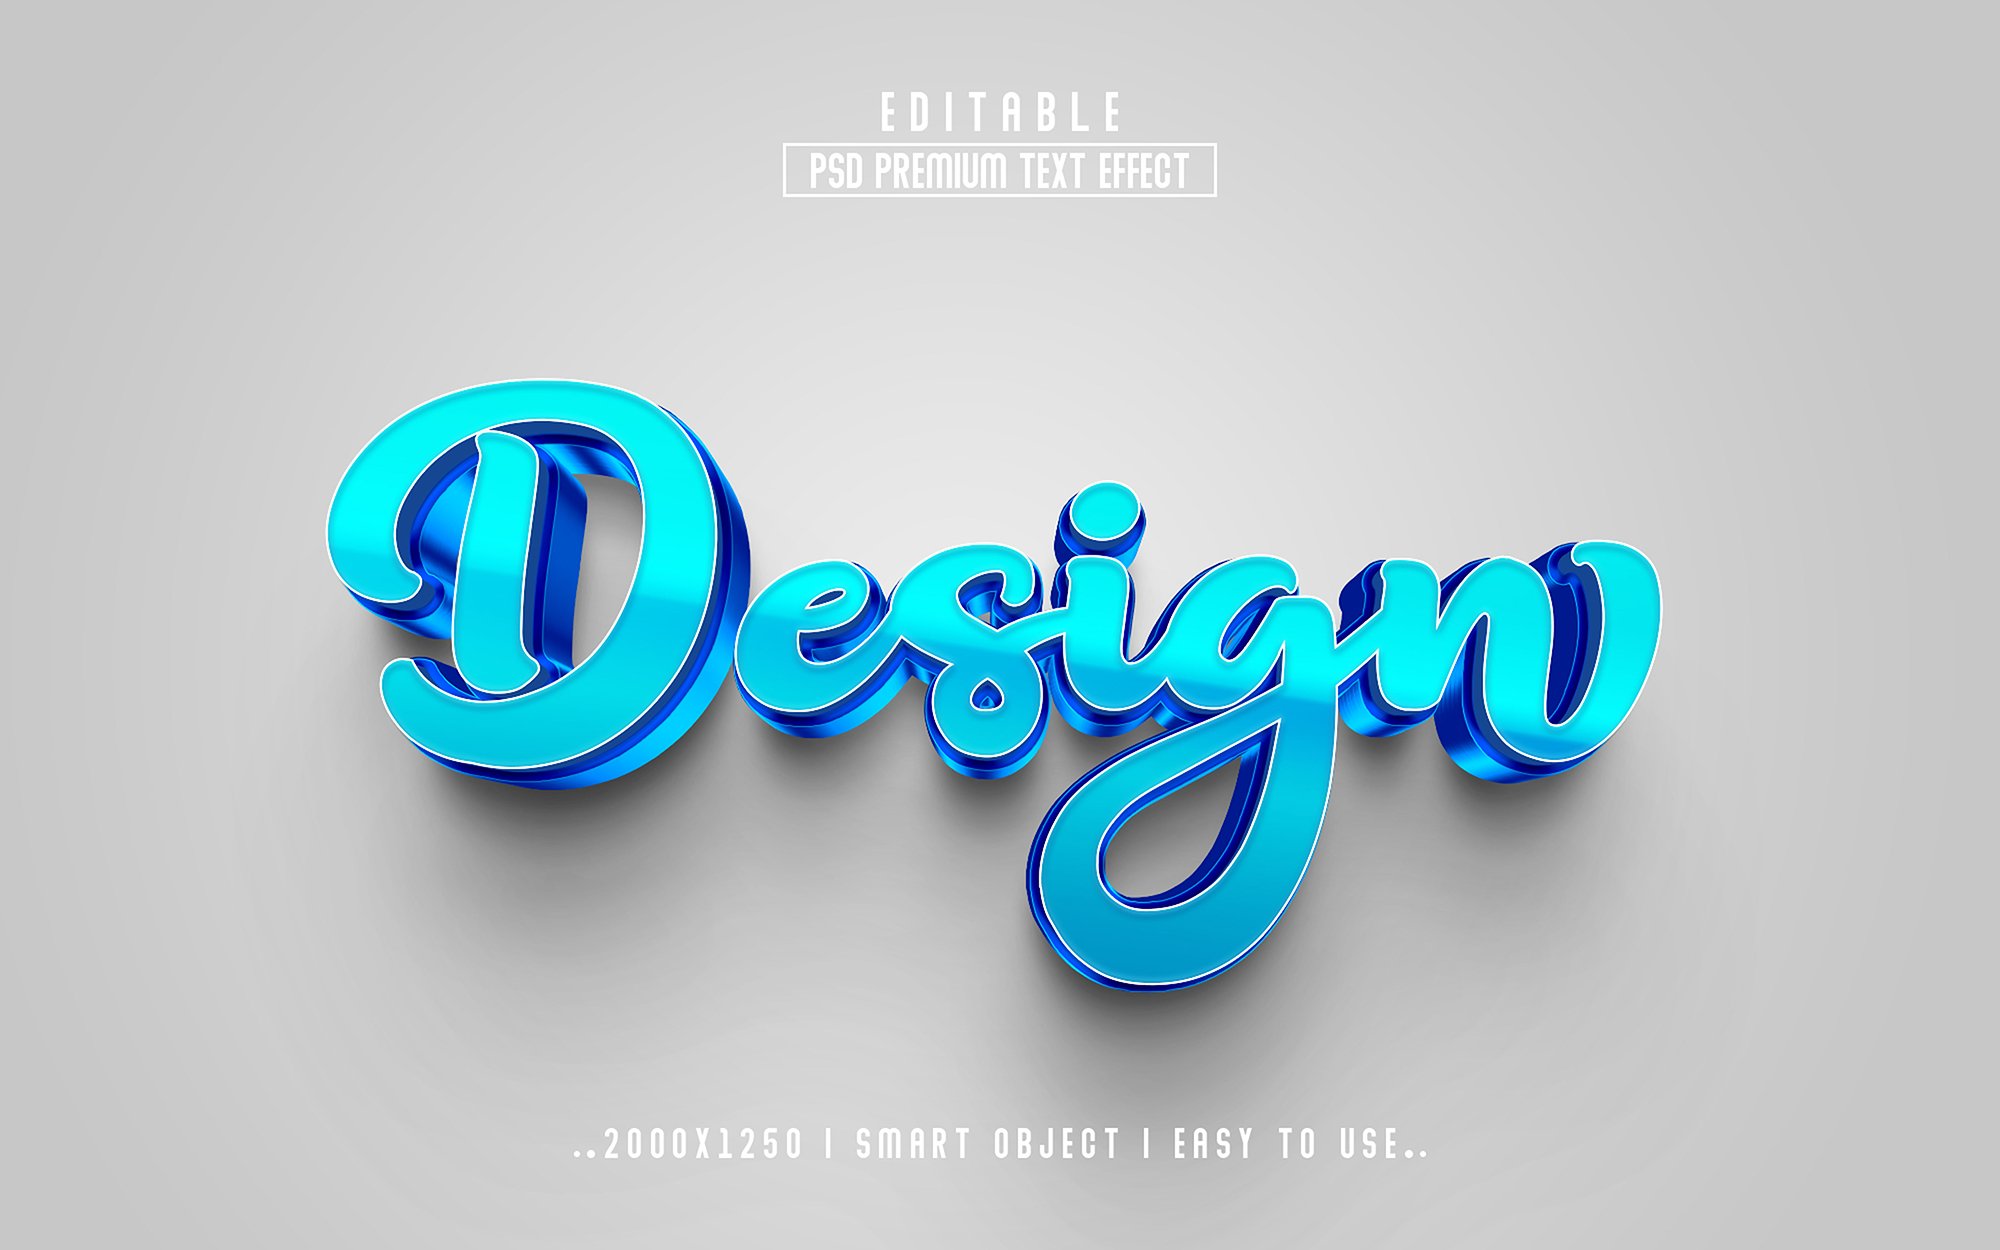 Design 3D Editable Text Effect stylecover image.